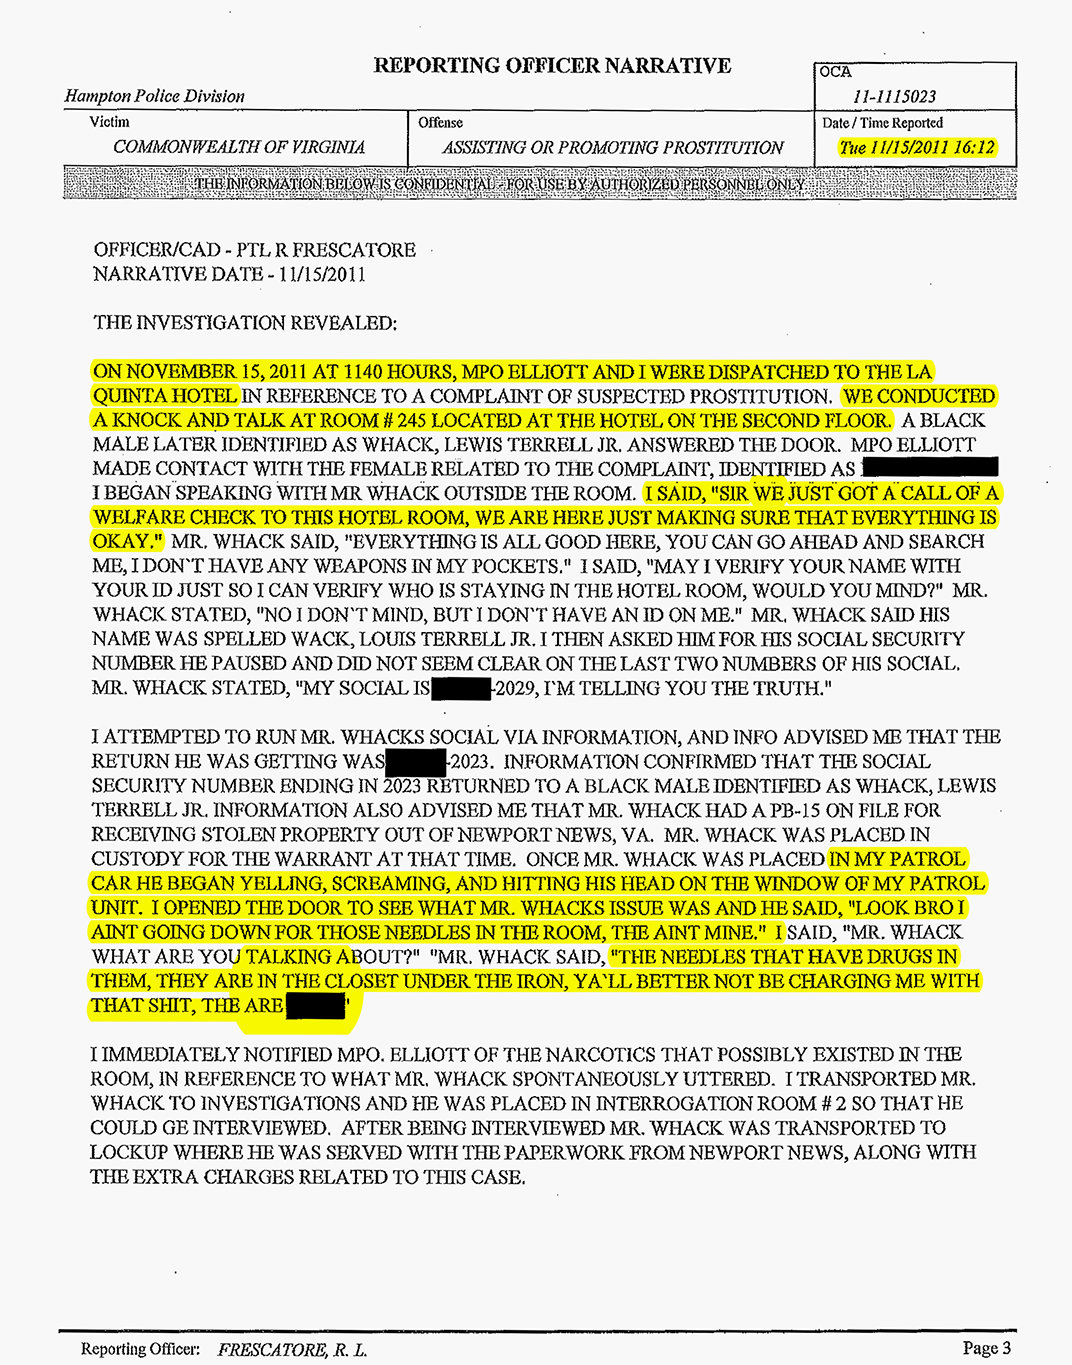 Hampton police report about Ron Miscavige hooker page 1